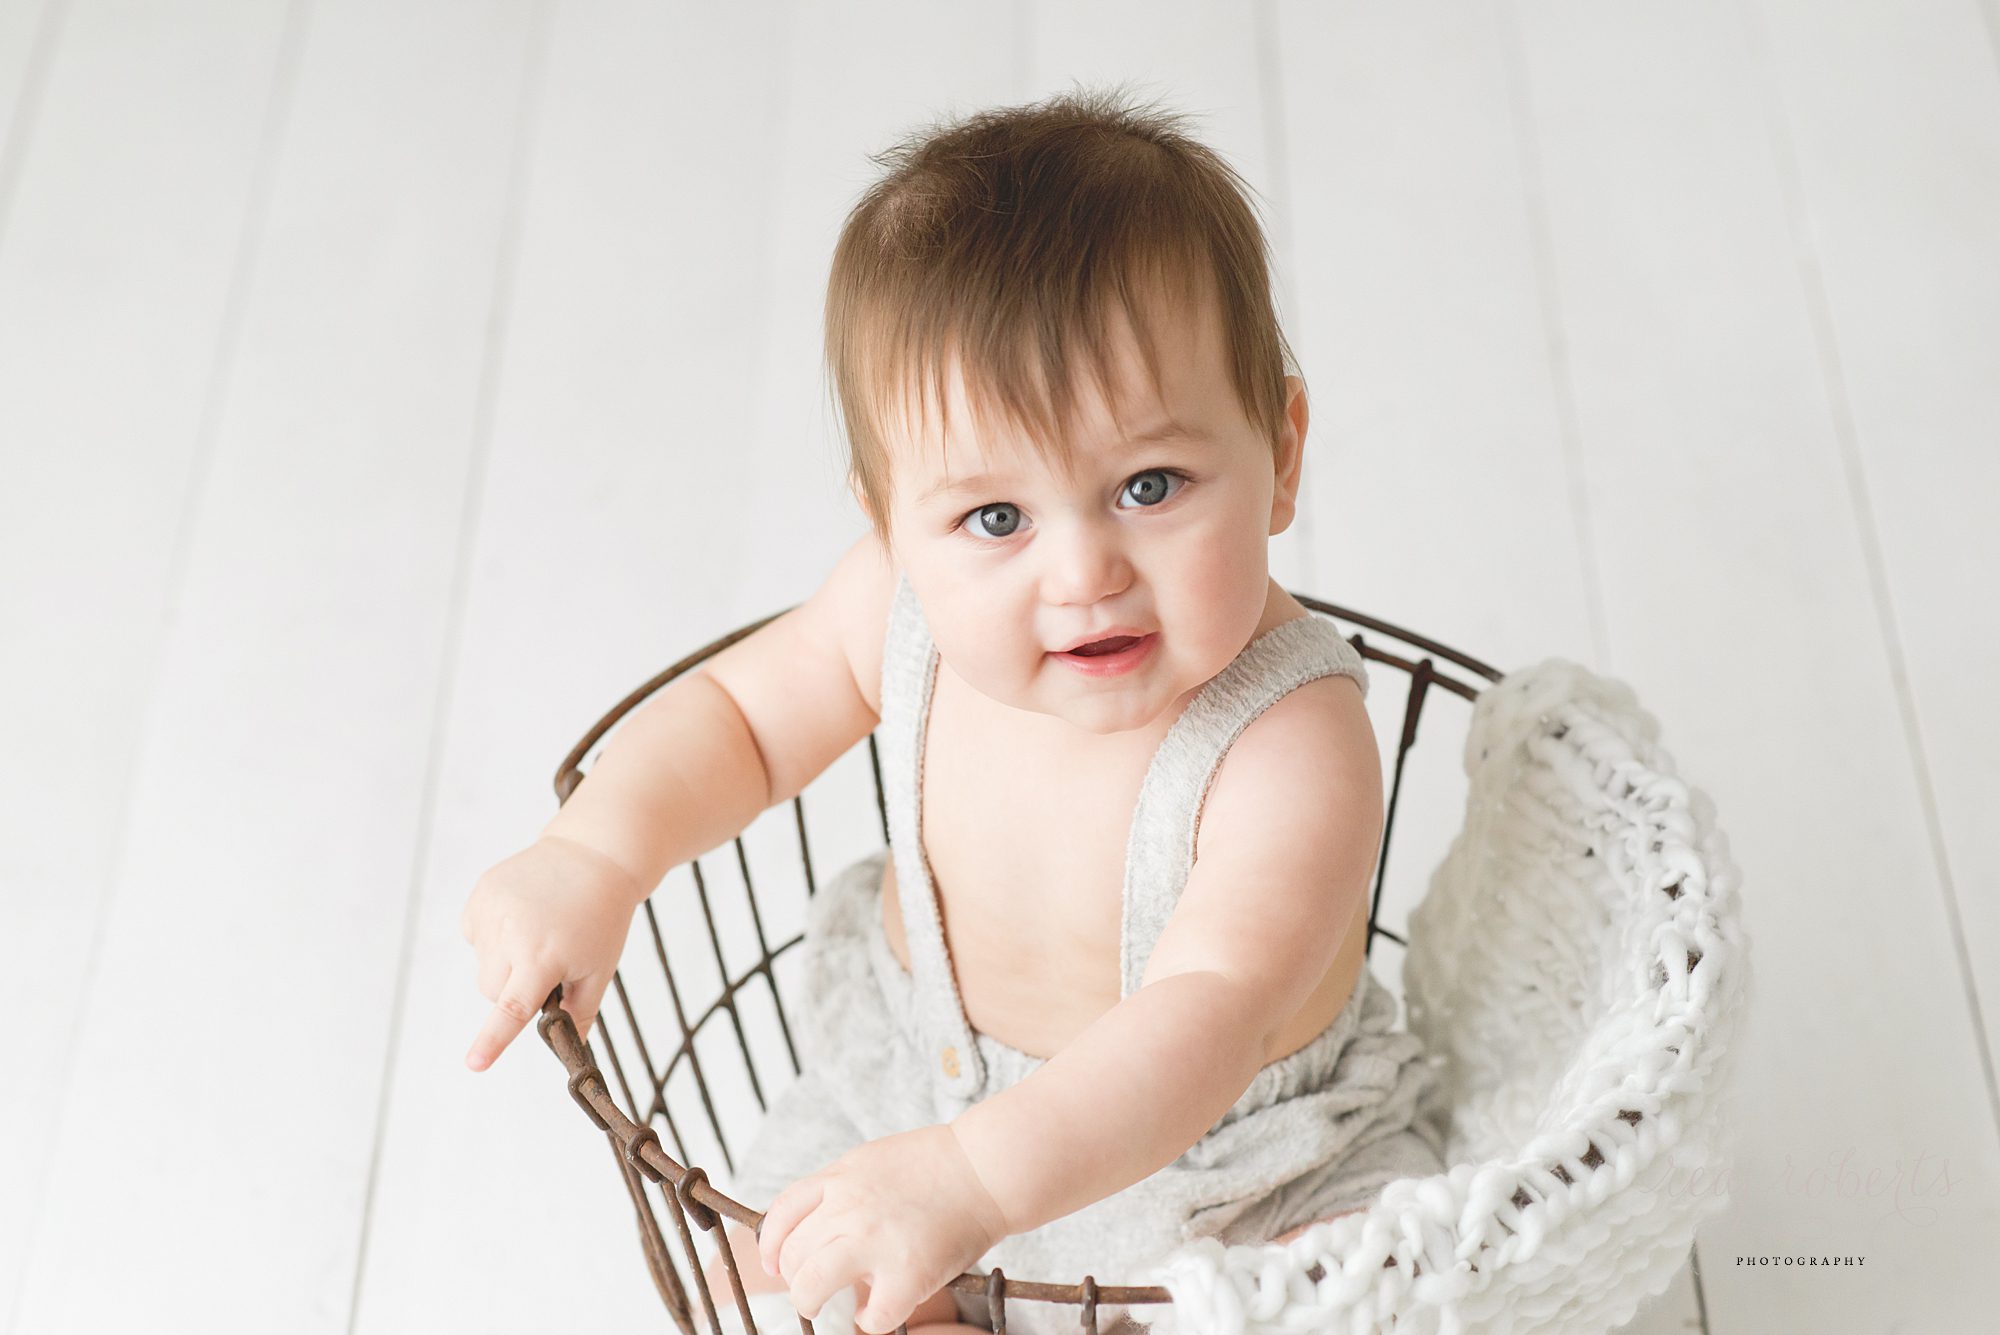 cute baby boy photo ideas sitting up in basket | Reaj Roberts Photography 